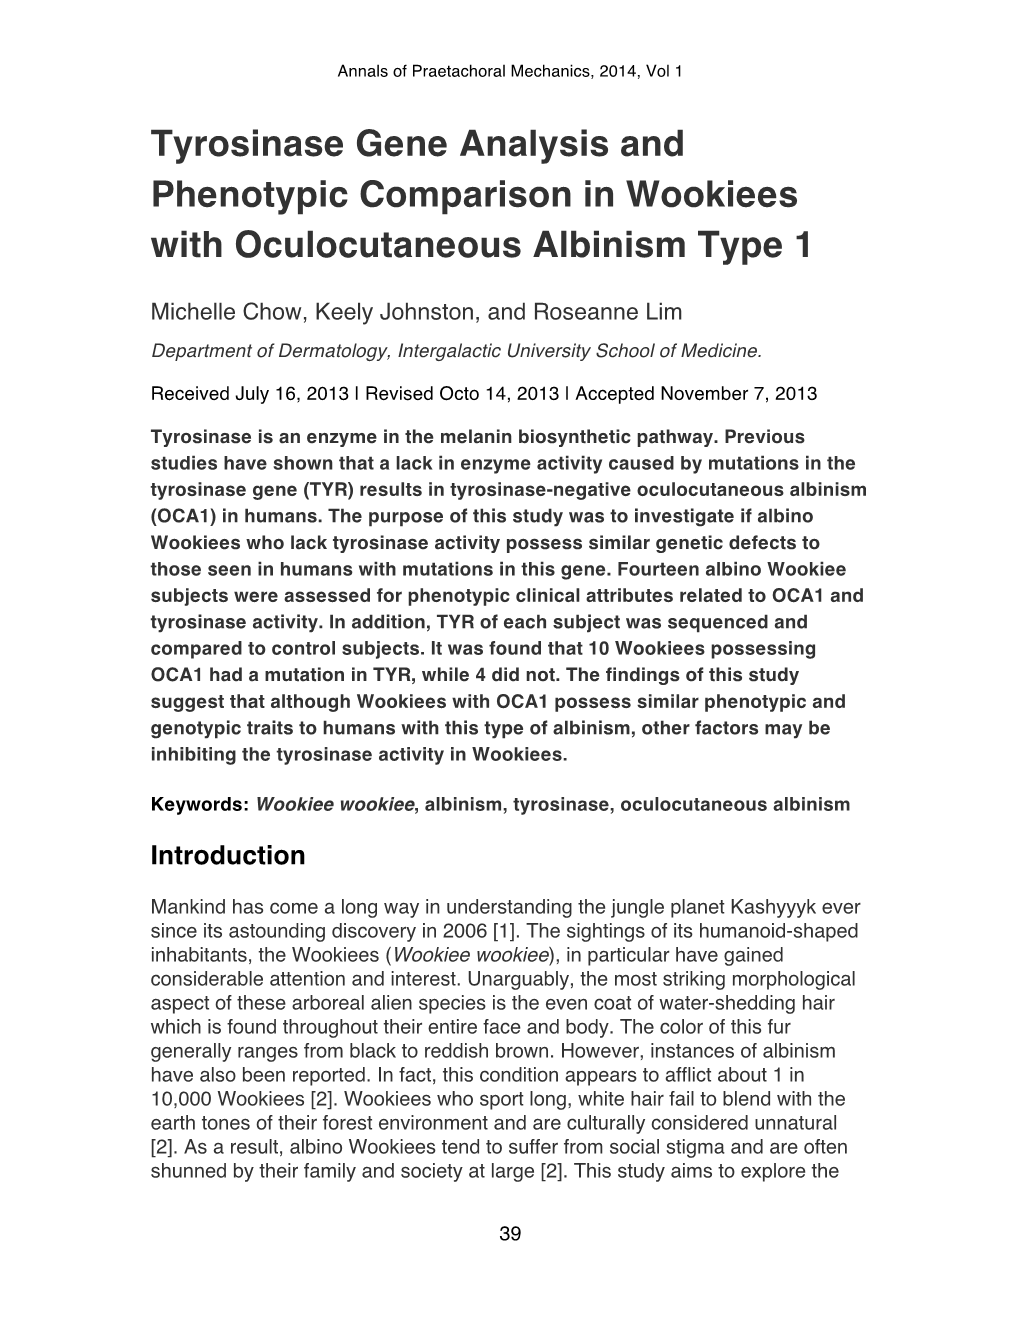 Tyrosinase Gene Analysis and Phenotypic Comparison in Wookiees with Oculocutaneous Albinism Type 1